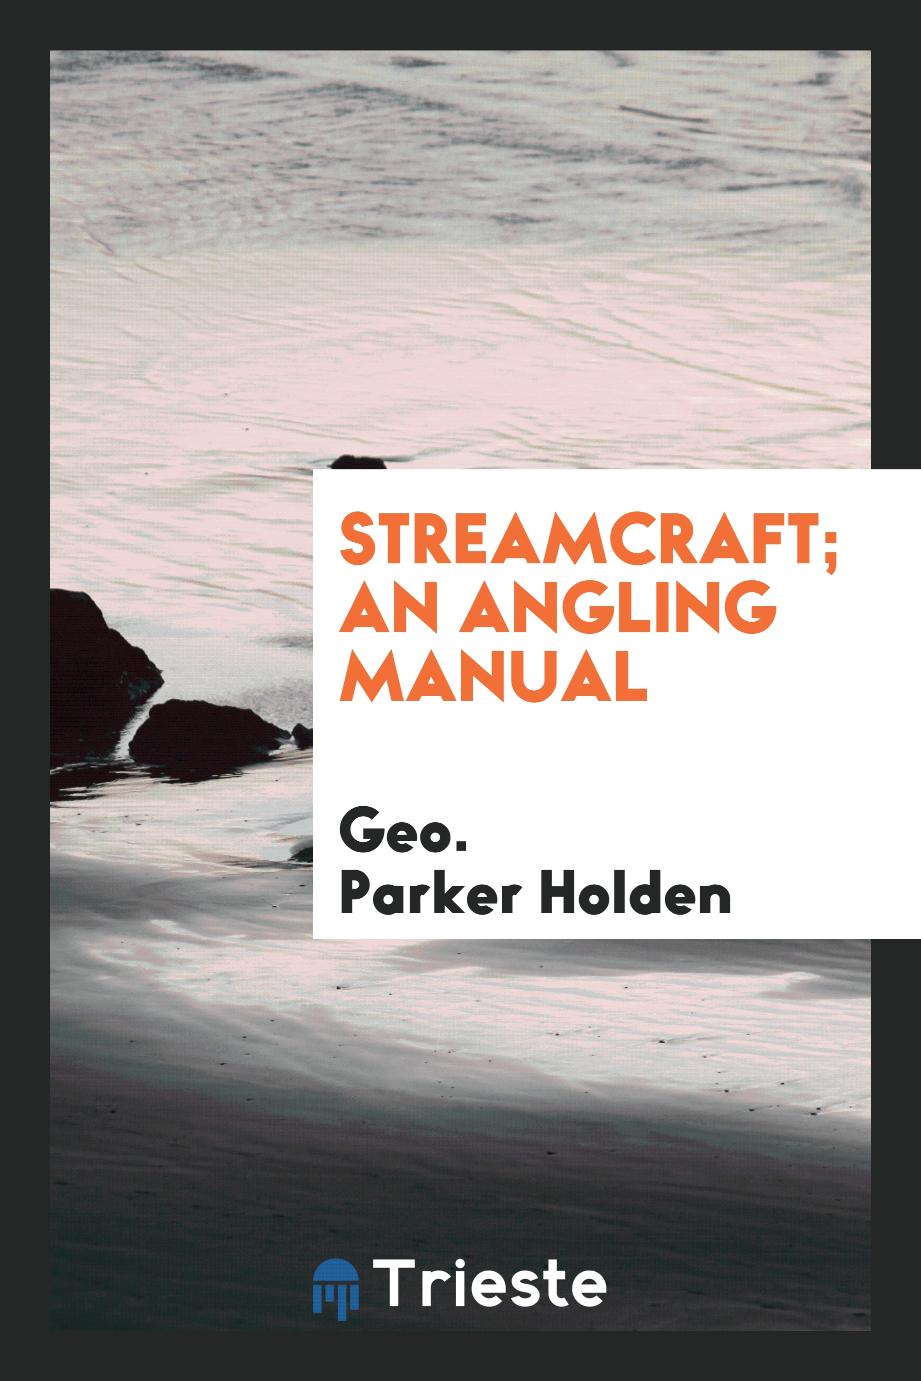 Streamcraft; an angling manual